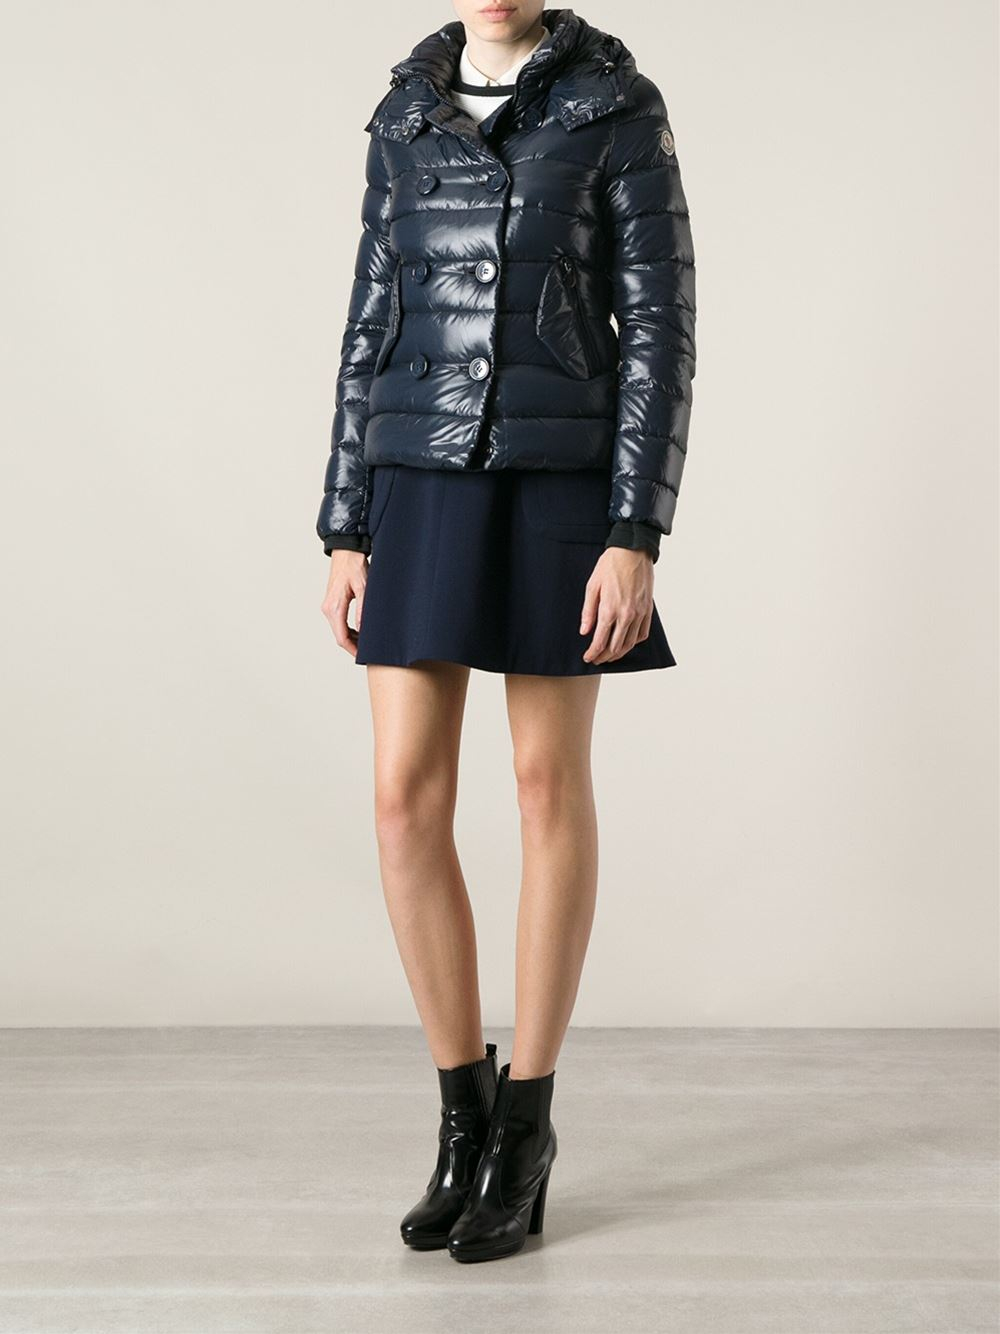 Lyst - Moncler Plane Padded Jacket in Blue